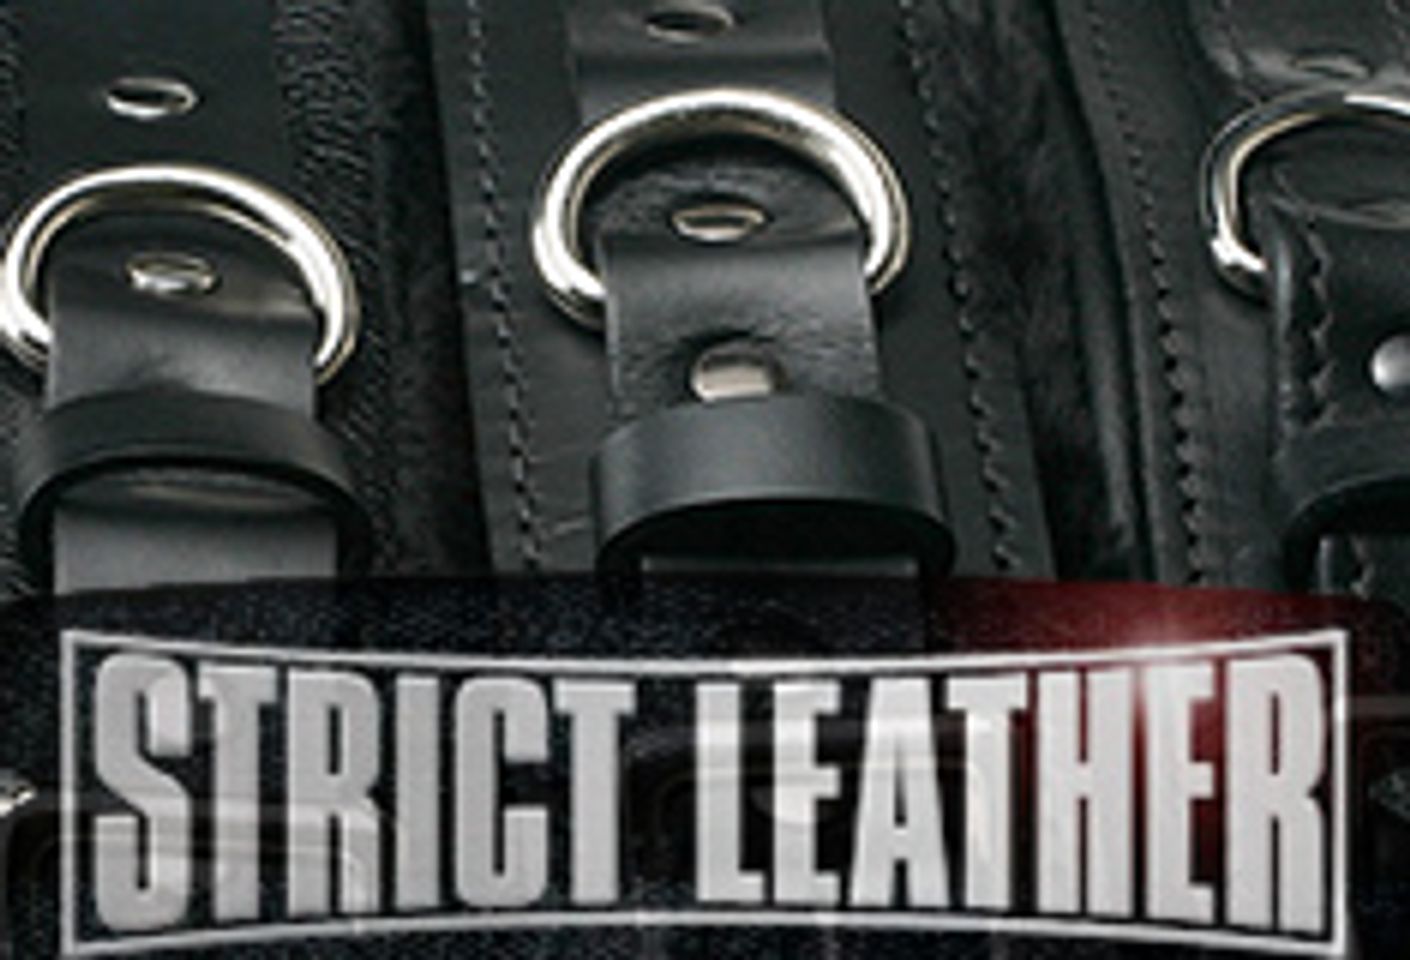 XR launches StrictLeather site